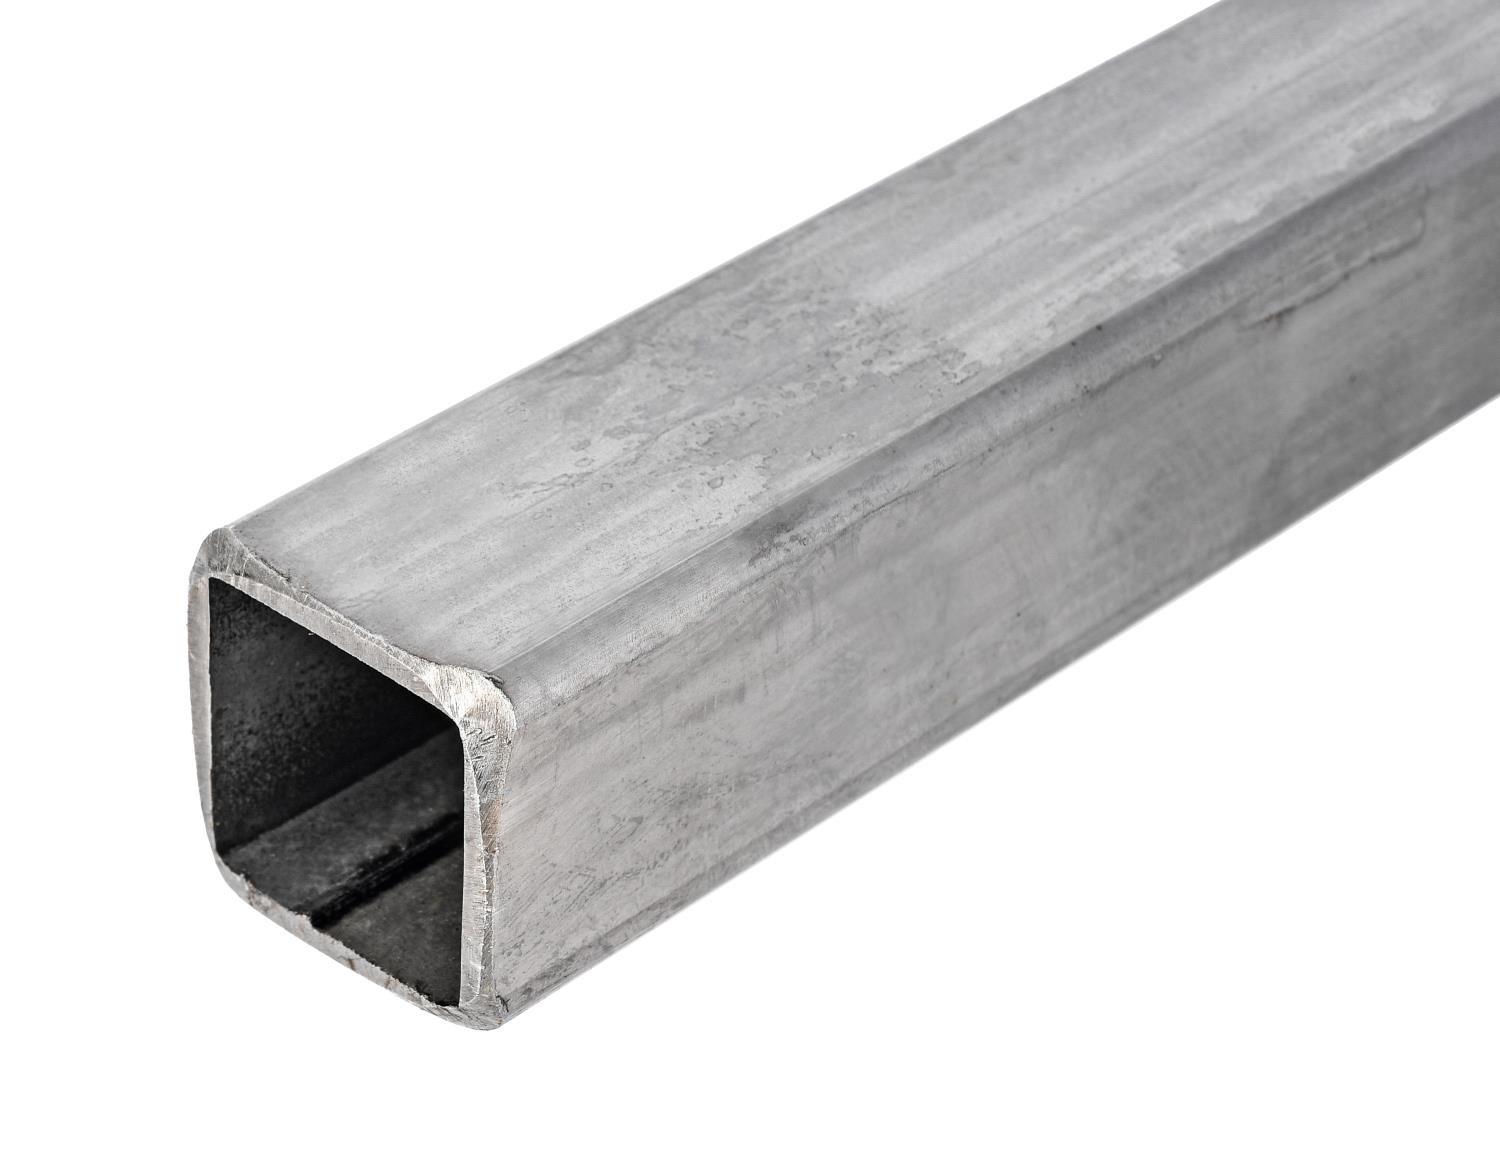 Mild Steel Tubing [Square, 1 in. Width x 0.083 in. Thickness x 4 ft. Length]